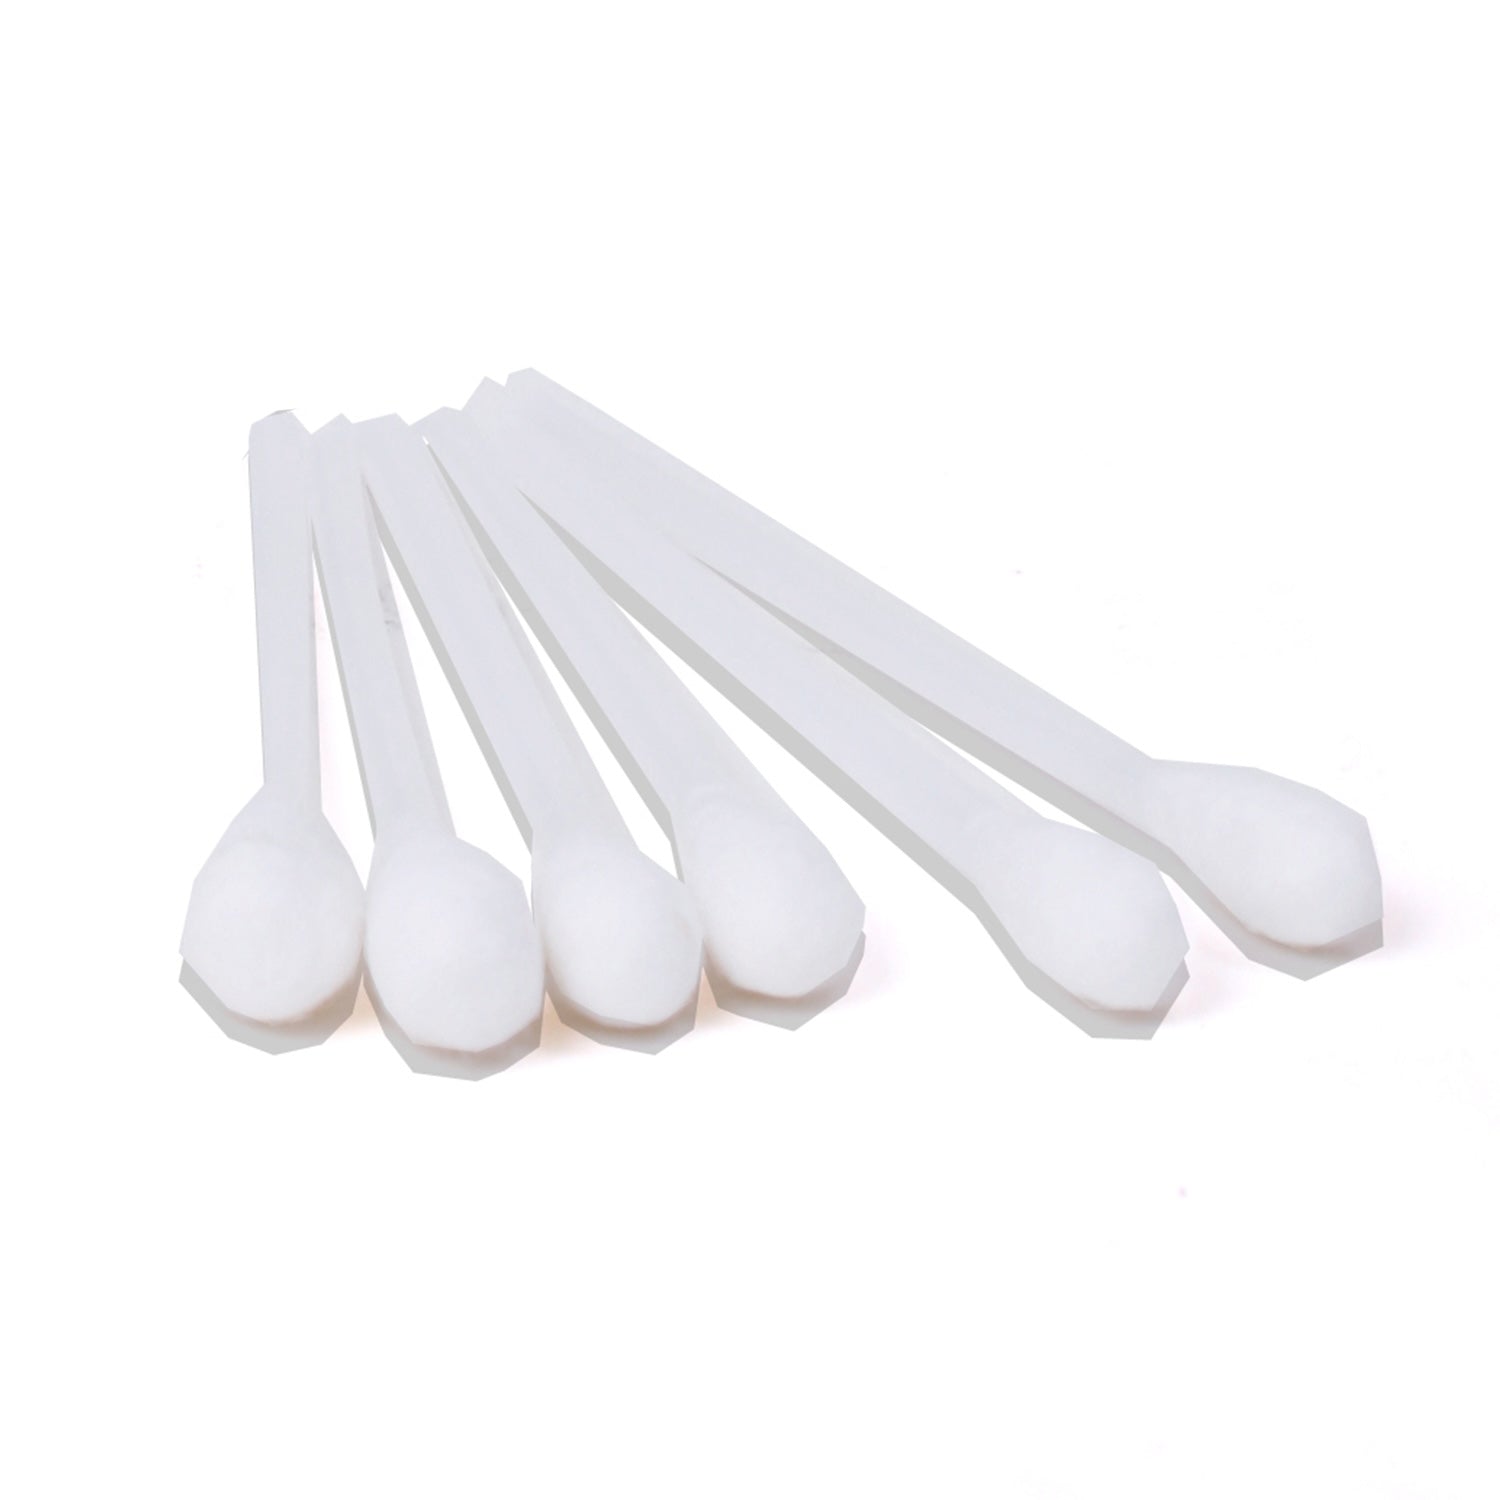 Cryospray 59 Cotton Tipped Applicators | Pack of 12 (2)